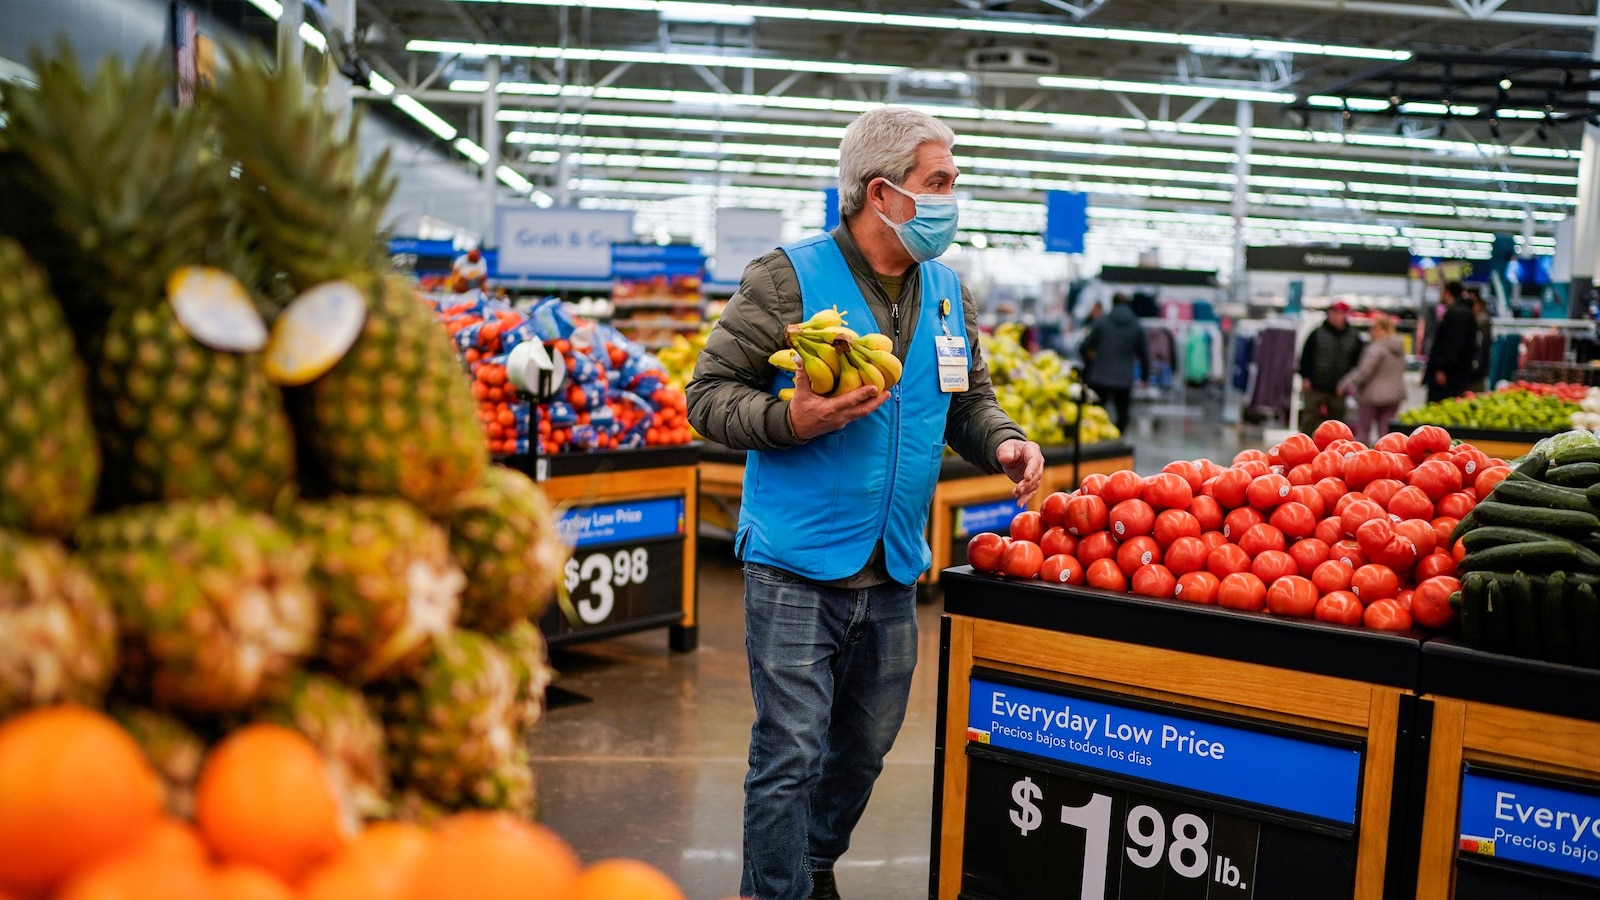 Walmart's strong first quarter is driven by consumers looking for bargains, while inflation remains an issue